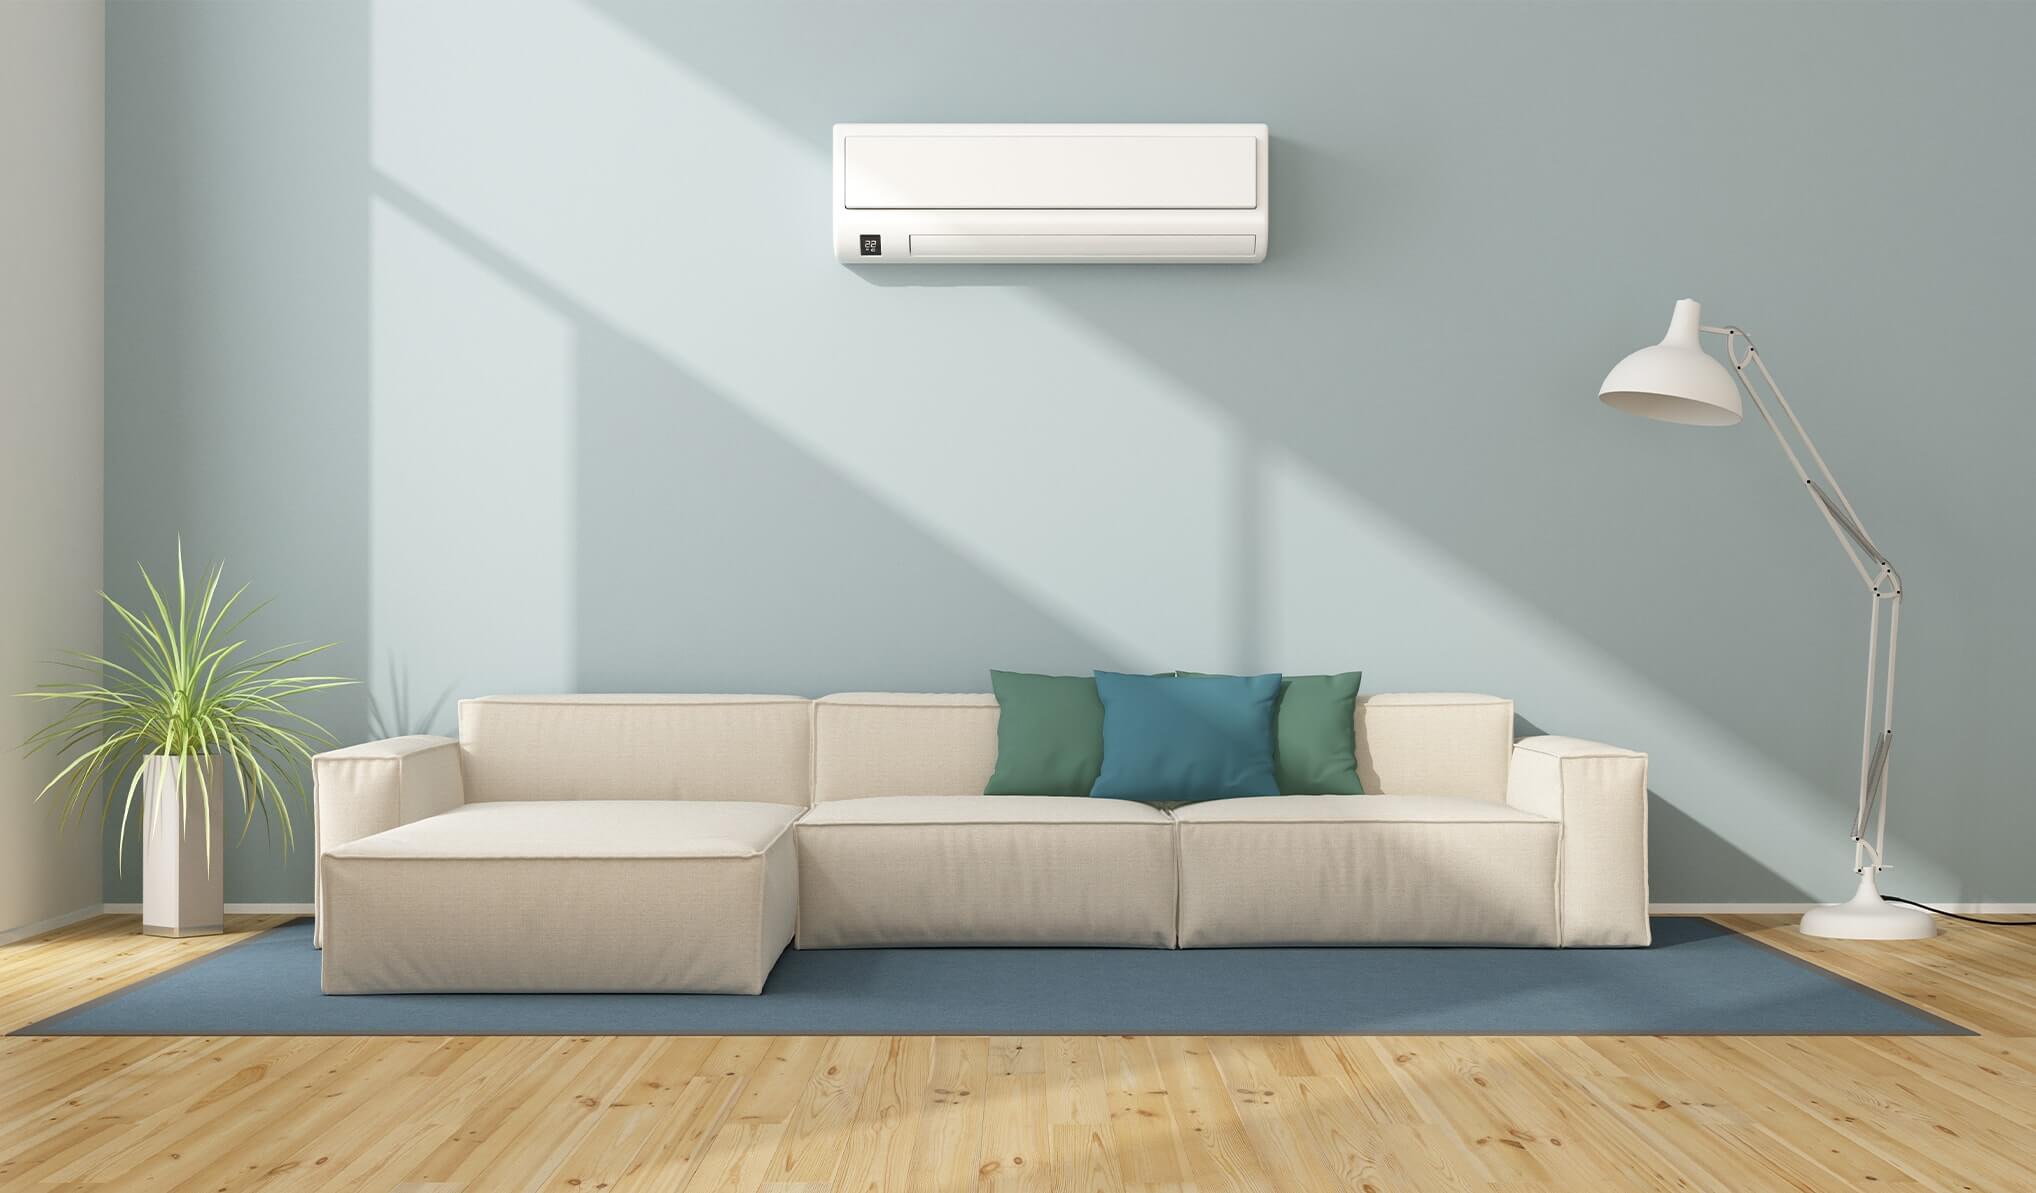 Wall-mounted split air conditioner